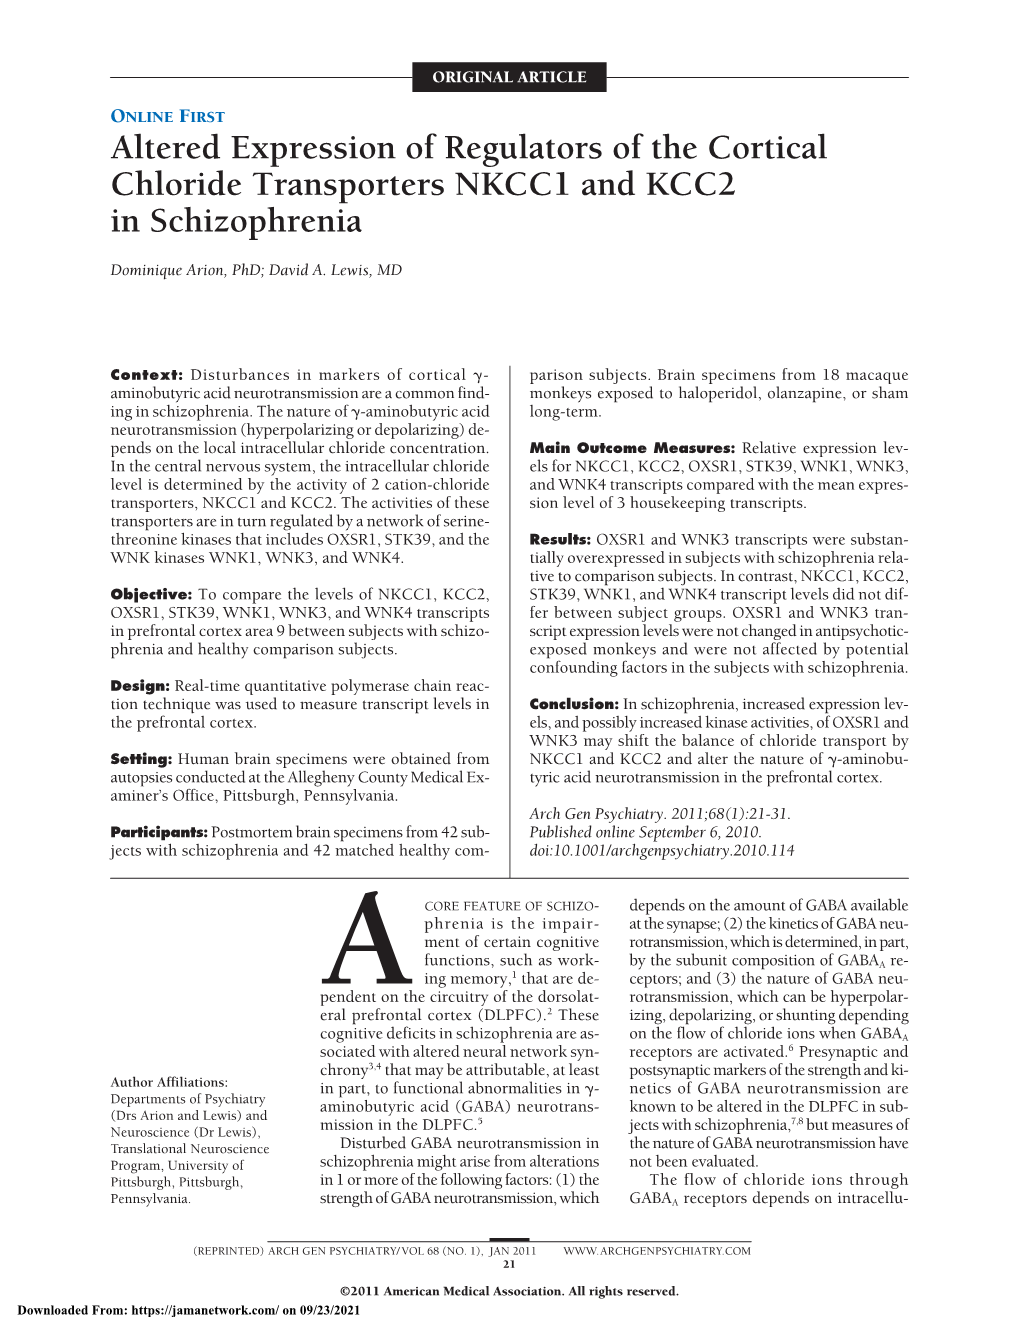 Altered Expression of Regulators of the Cortical Chloride Transporters NKCC1 and KCC2 in Schizophrenia